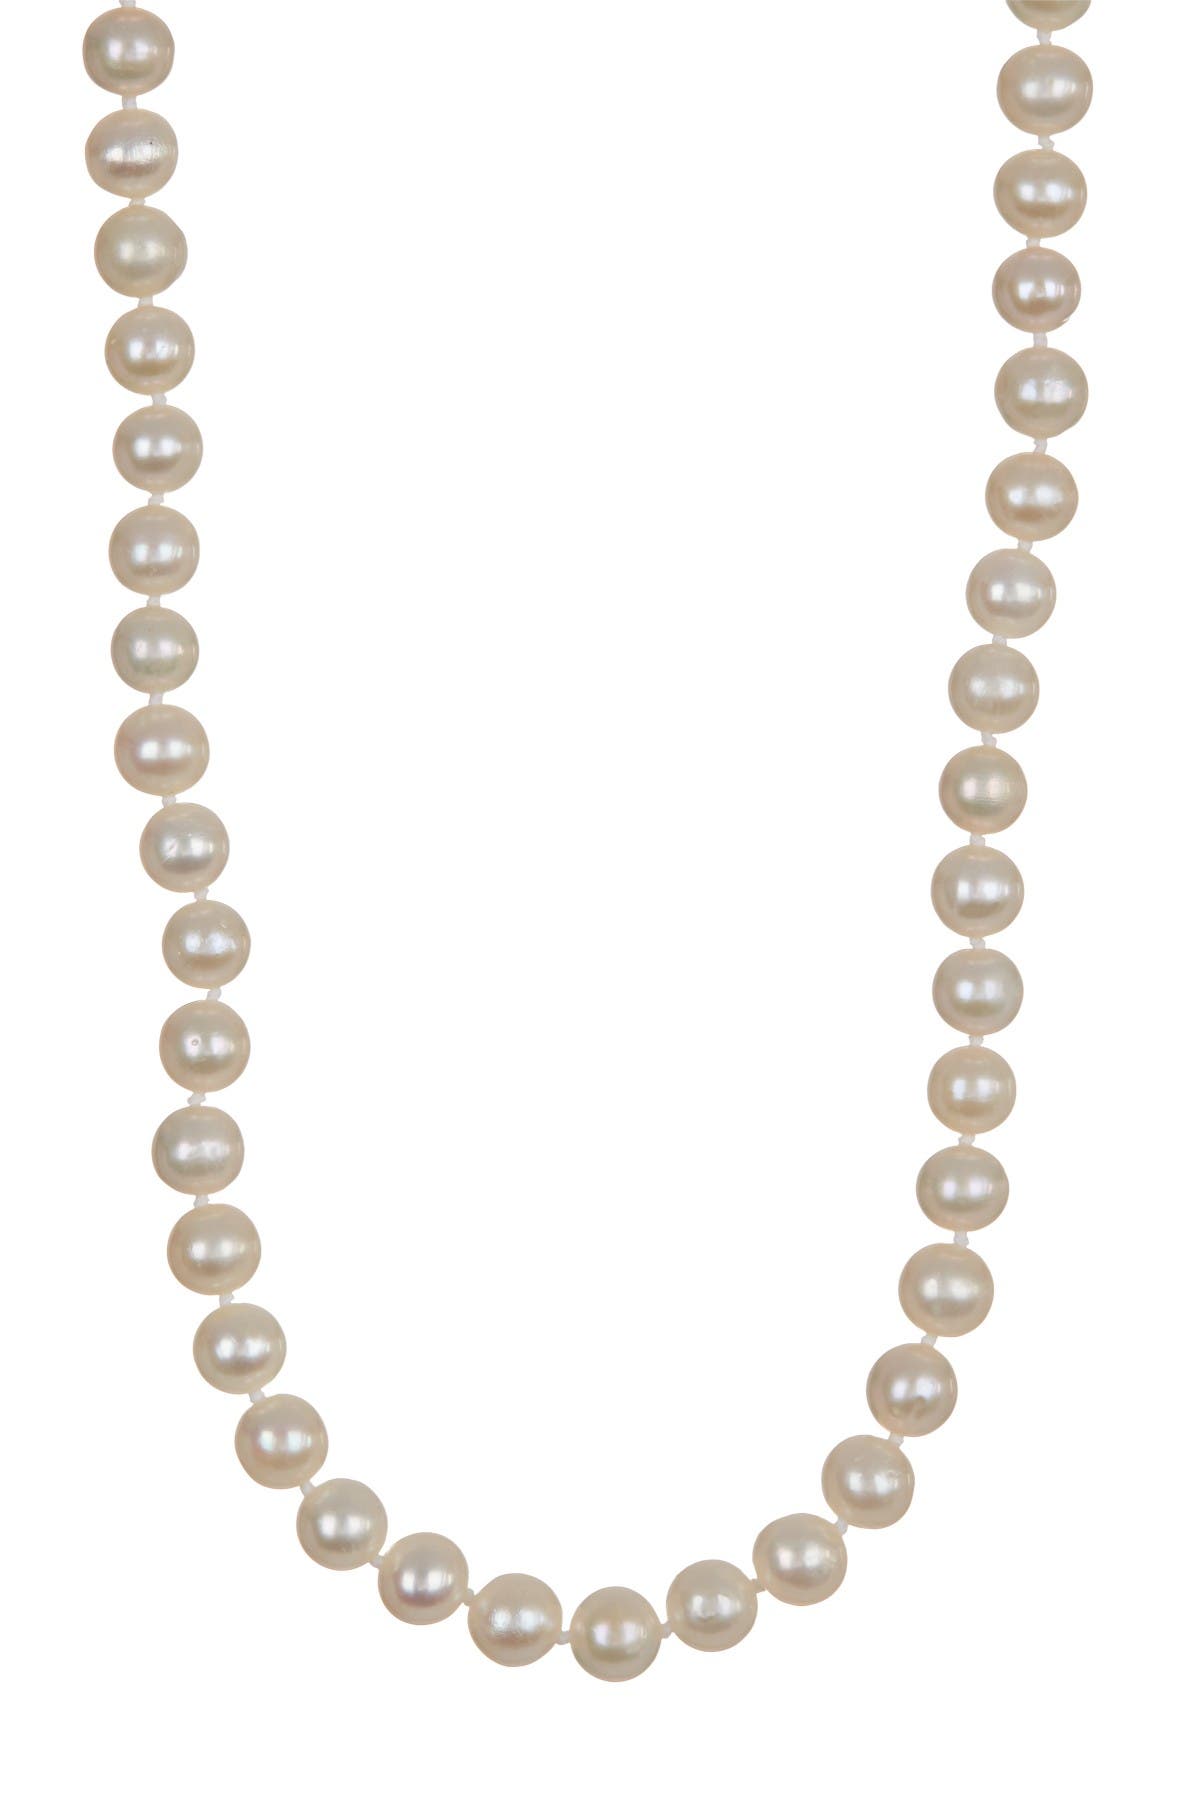 Splendid Pearls 6mm Natural White Freshwater Pearl Necklace